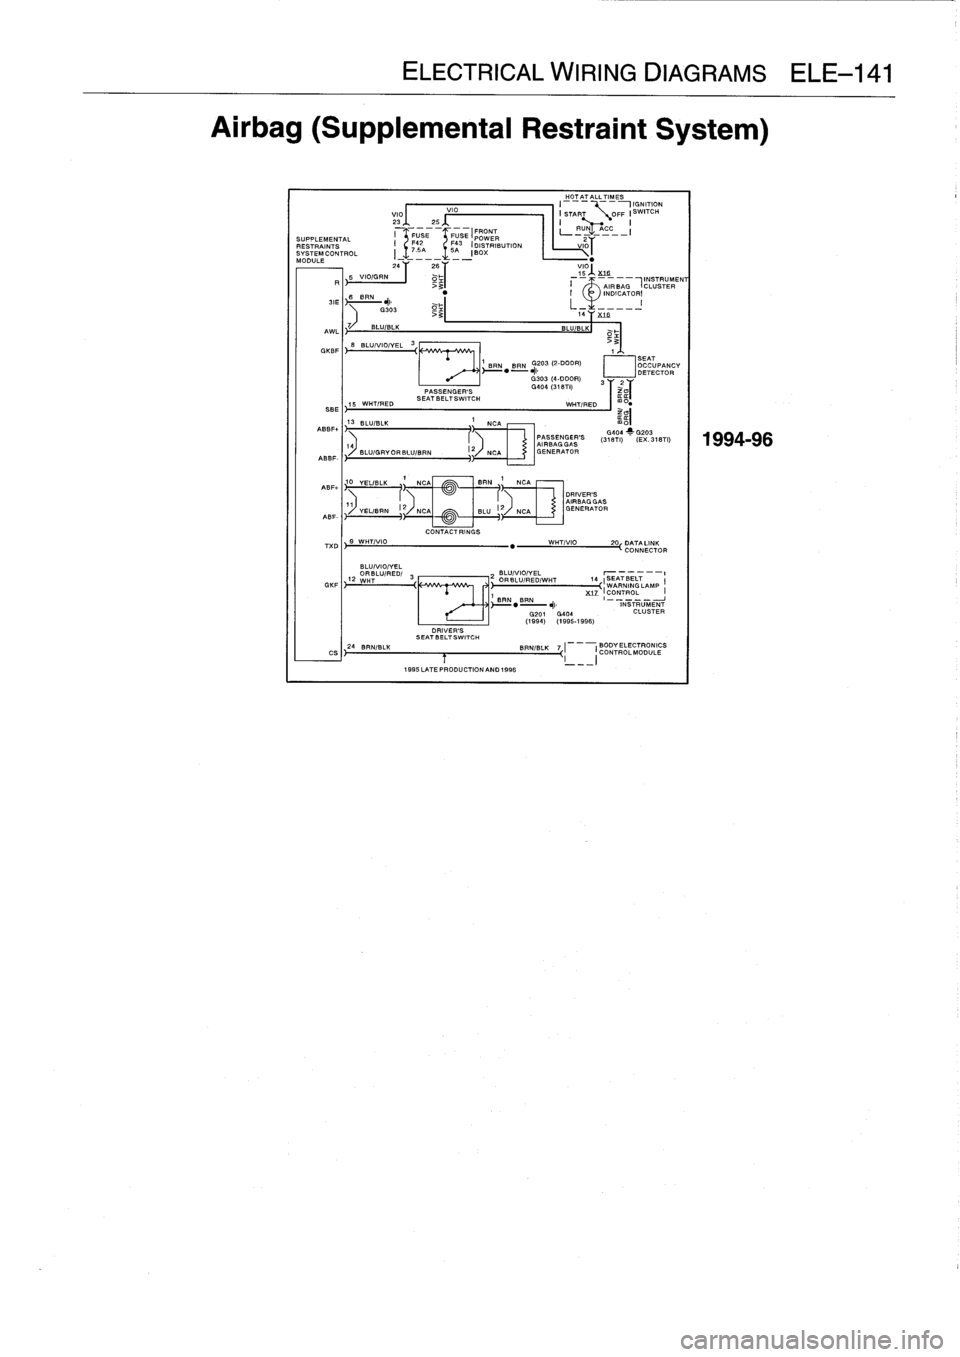 BMW 323i 1995 E36 Workshop Manual 
ELECTRICAL
WIRING
DIAGRAMS
ELE-141

Airbag
(Supplemental
Restraint
System)

_
HO
_
TA
_
TALL
_
TIMES
I

	

IGNITION
VIO

	

VIO

	

I
START

	

OFF
!SWITCH
23
__
25
___

	

I

	

!
~`

	

(FRONT

	

